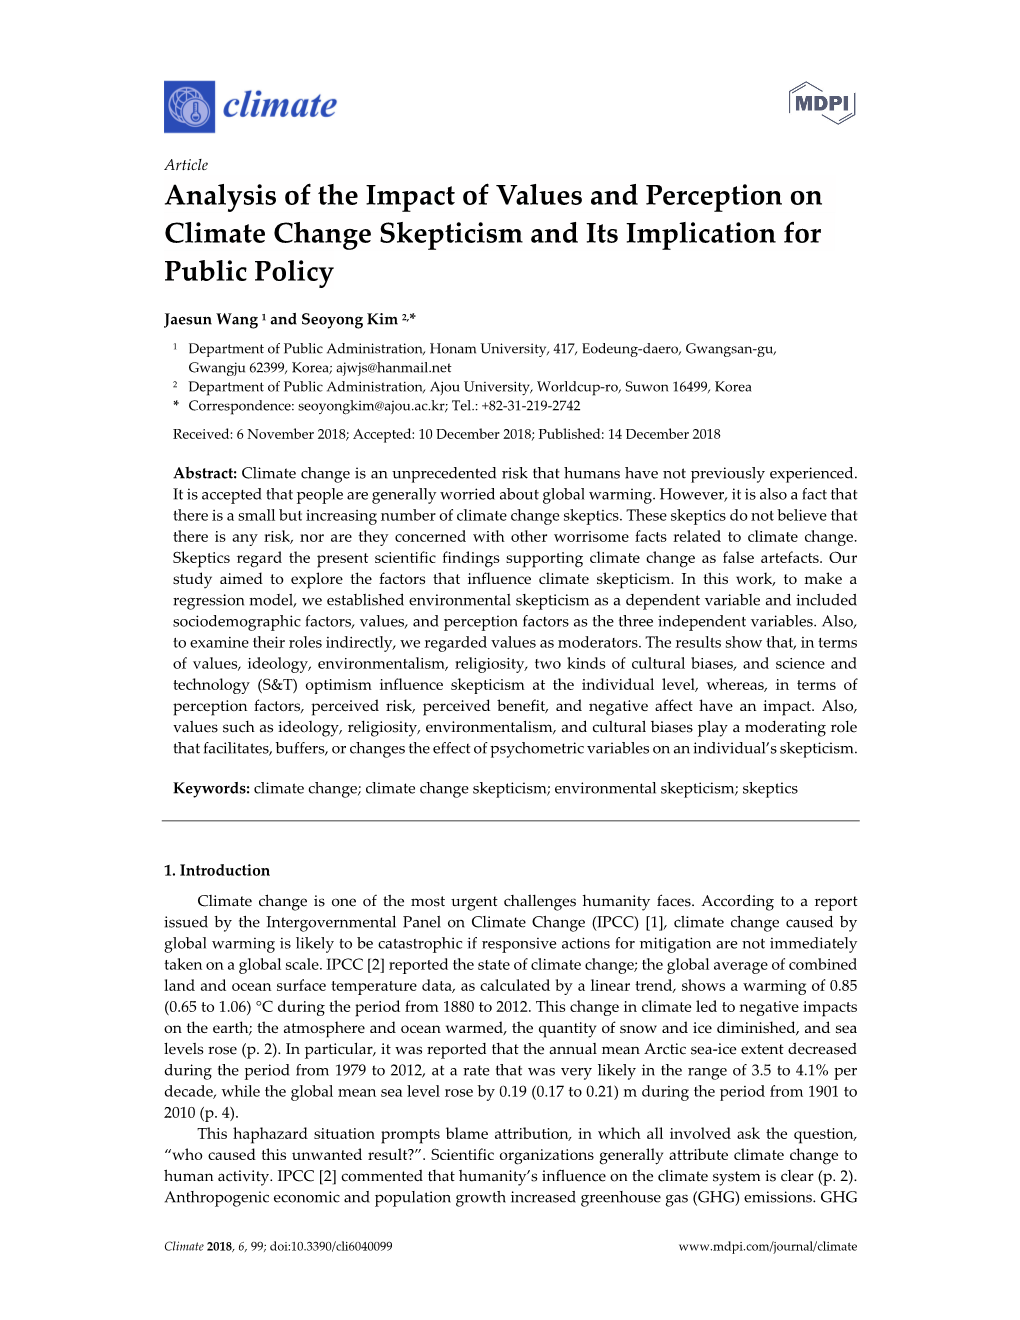 Analysis of the Impact of Values and Perception on Climate Change Skepticism and Its Implication for Public Policy